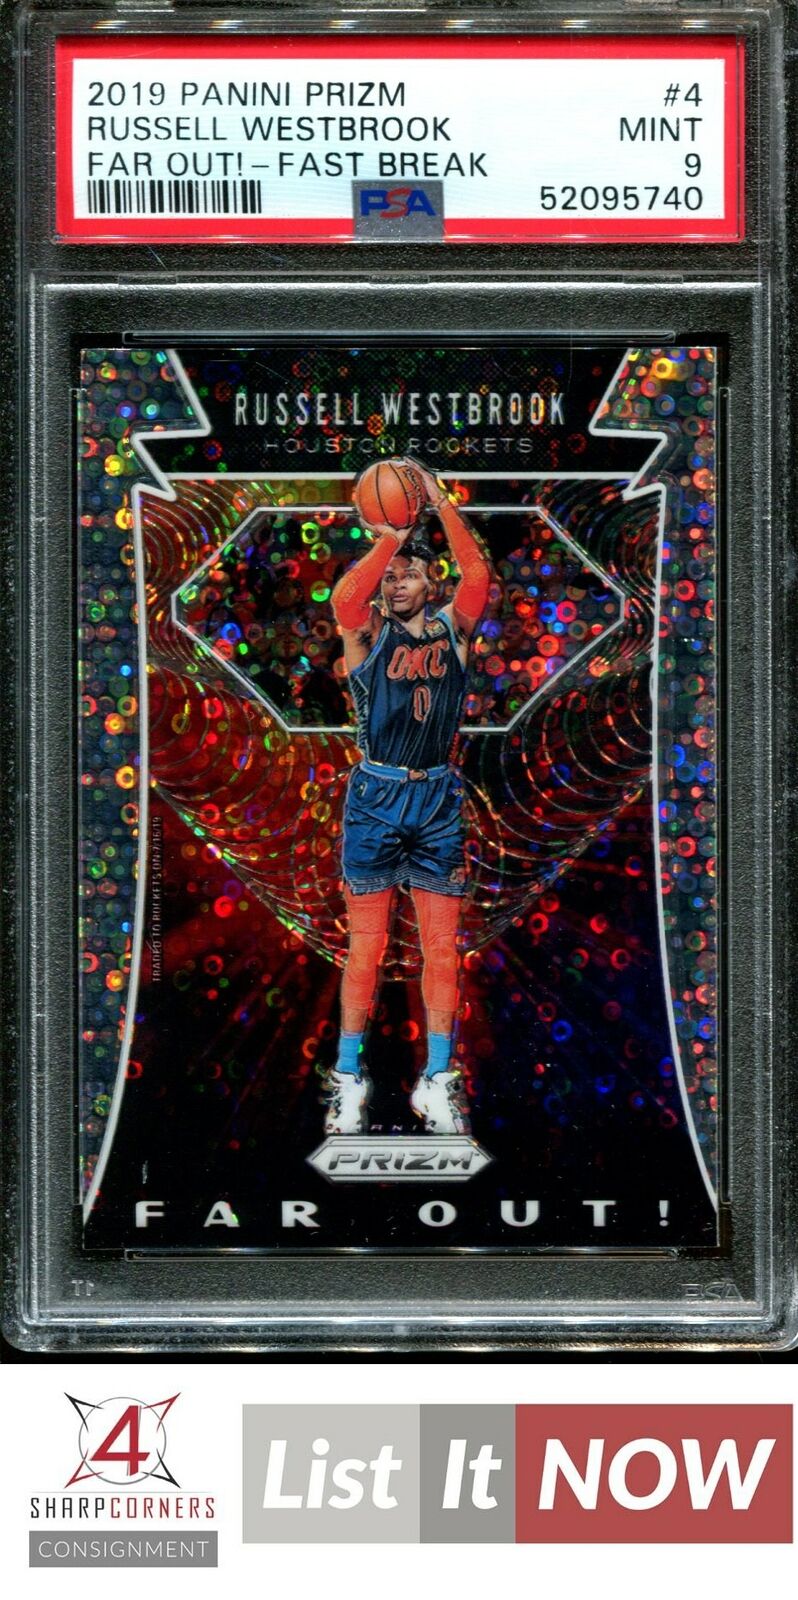 2019 PANINI PRIZM FAR OUT-FAST BREAK RUSSELL WESTBROOK POP 1 PSA 9 A3234136-740